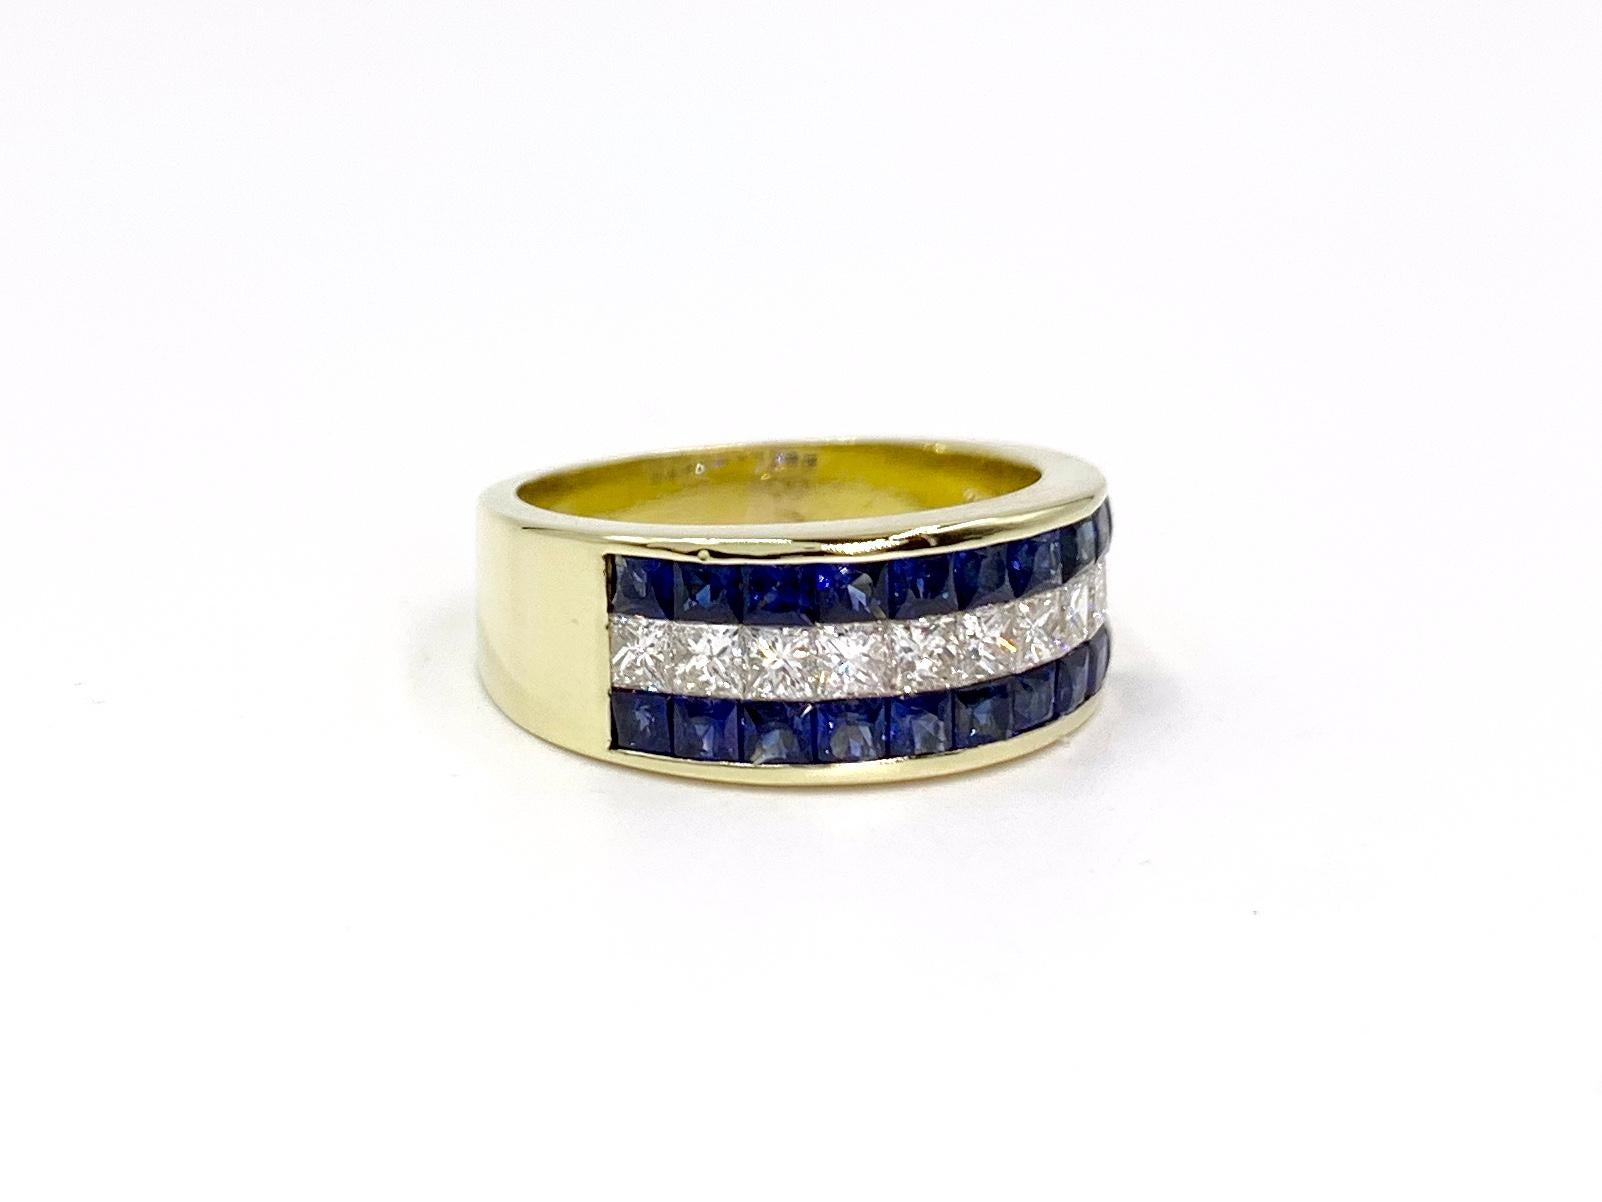 Sleek and simple invisibly set three row 18 karat yellow gold ring featuring approximately 2.25 carats of beautiful french cut square sapphires and approximately 1.20 carats of bright white princess cut diamonds. Sapphires are rich in color with